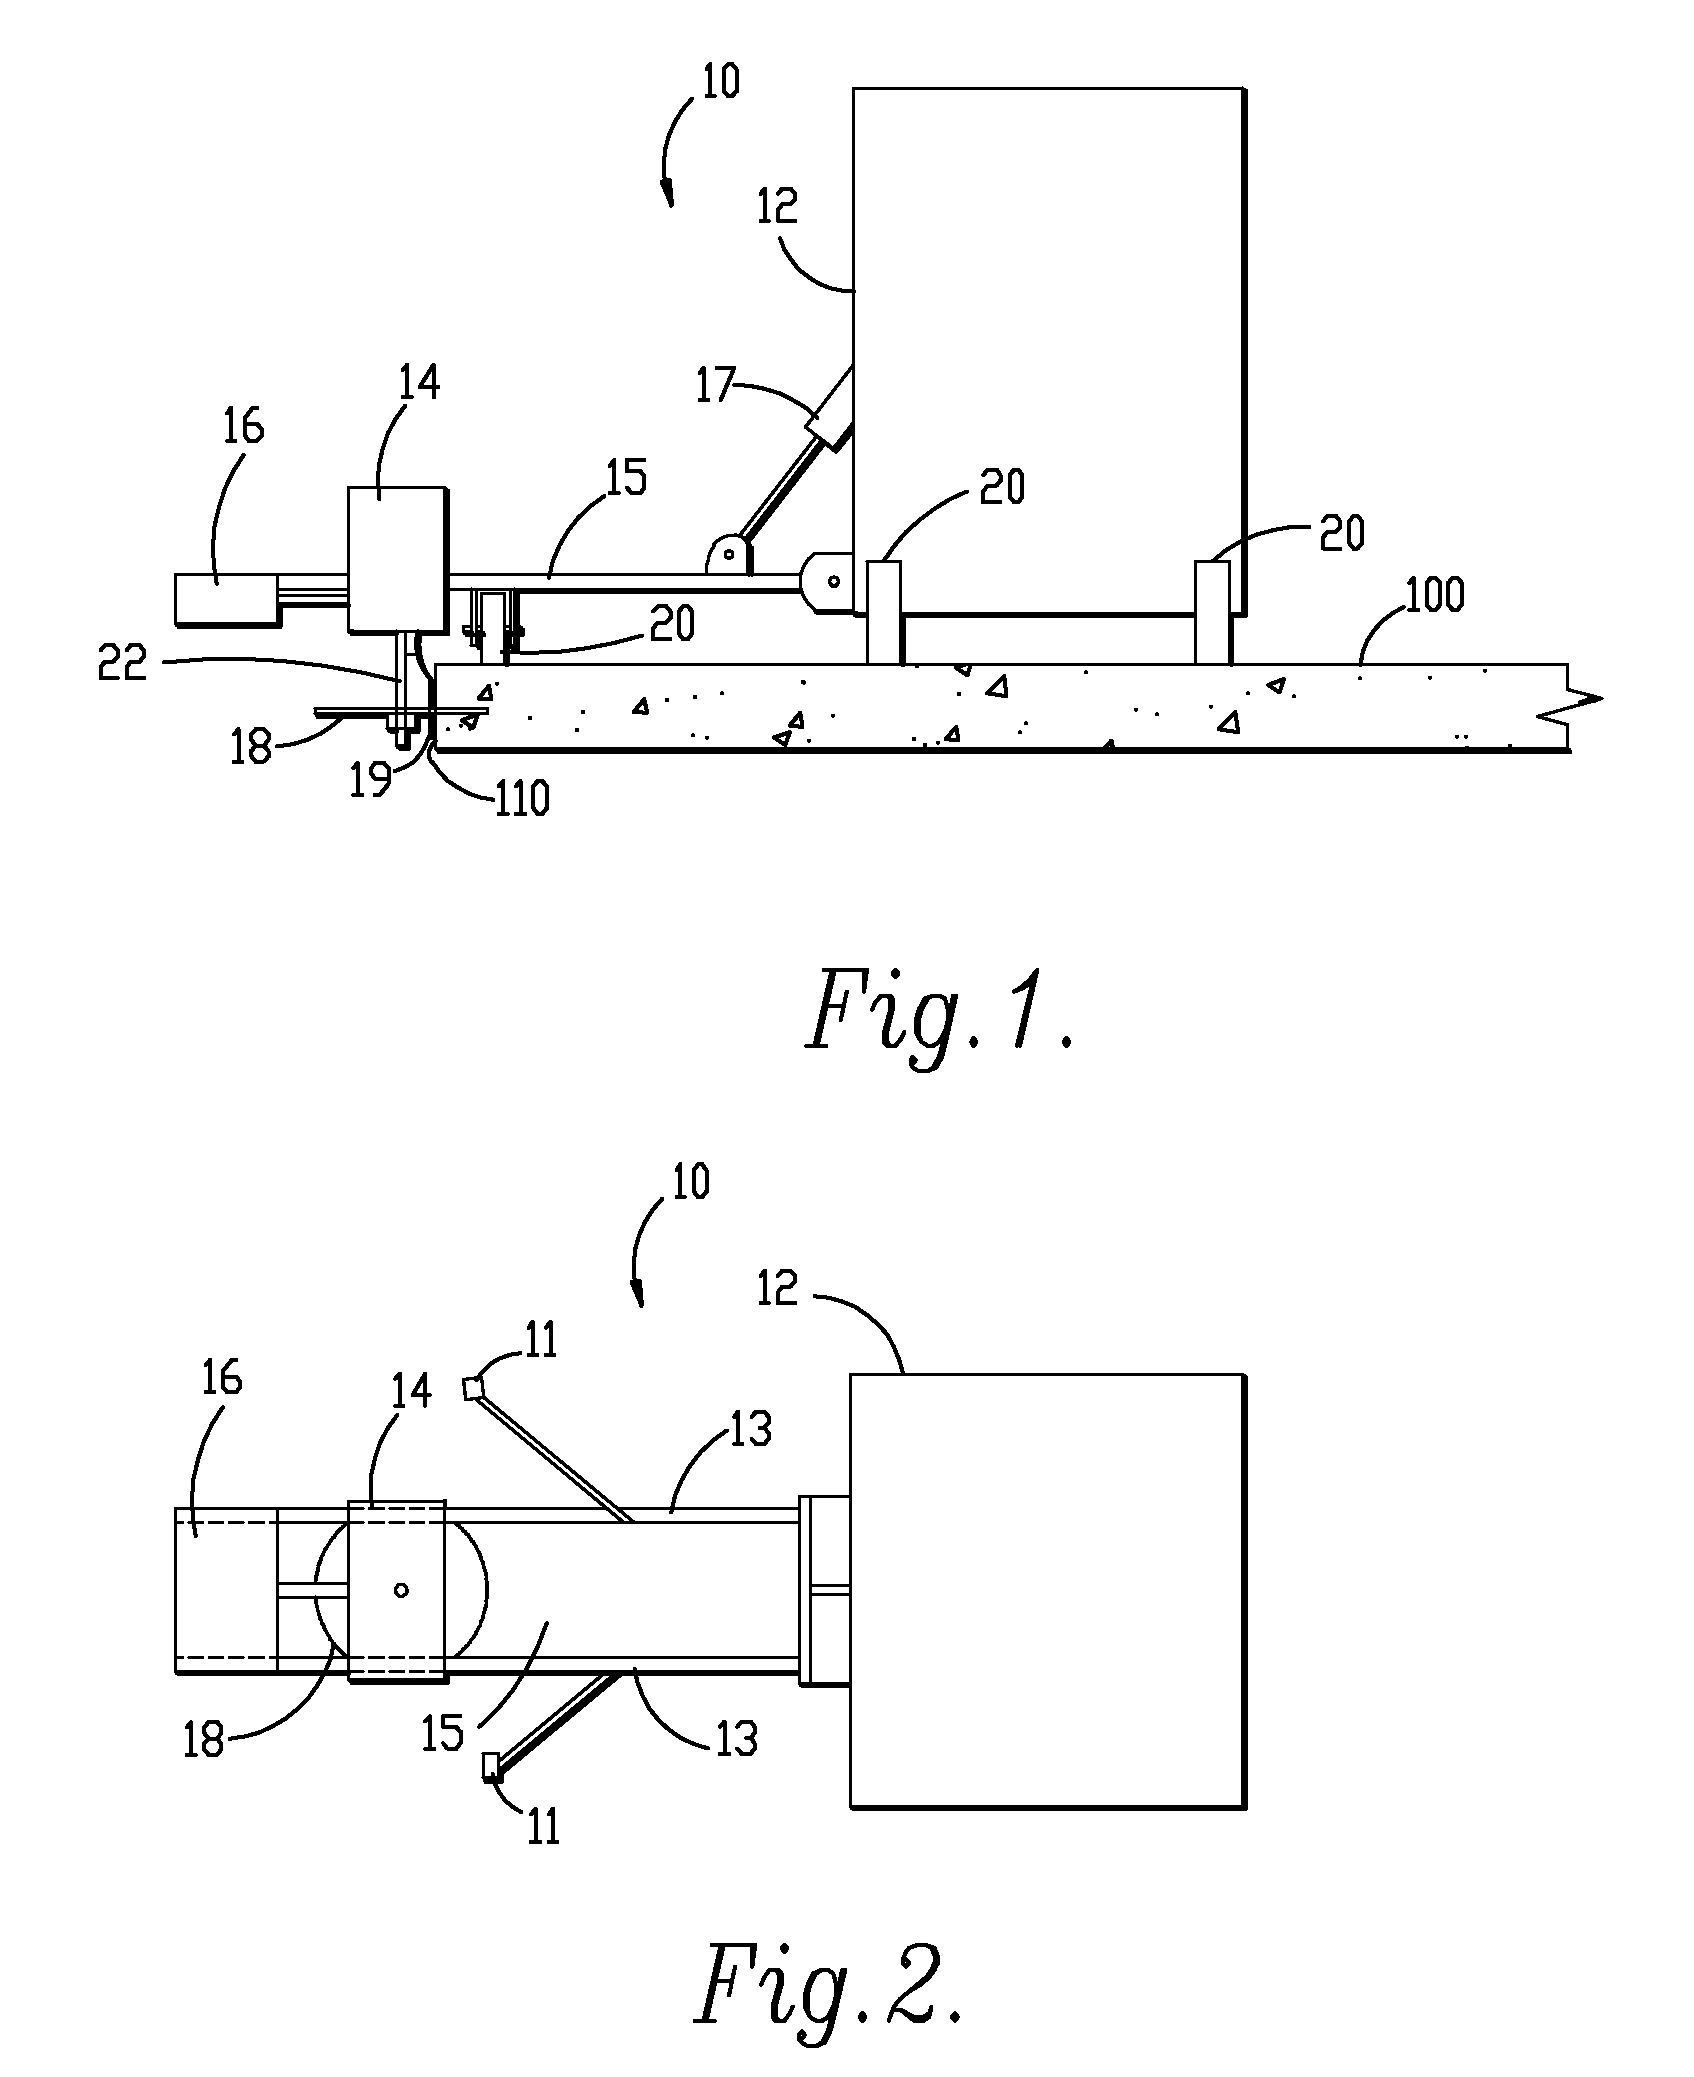 System and Method for Concrete Slab Connection